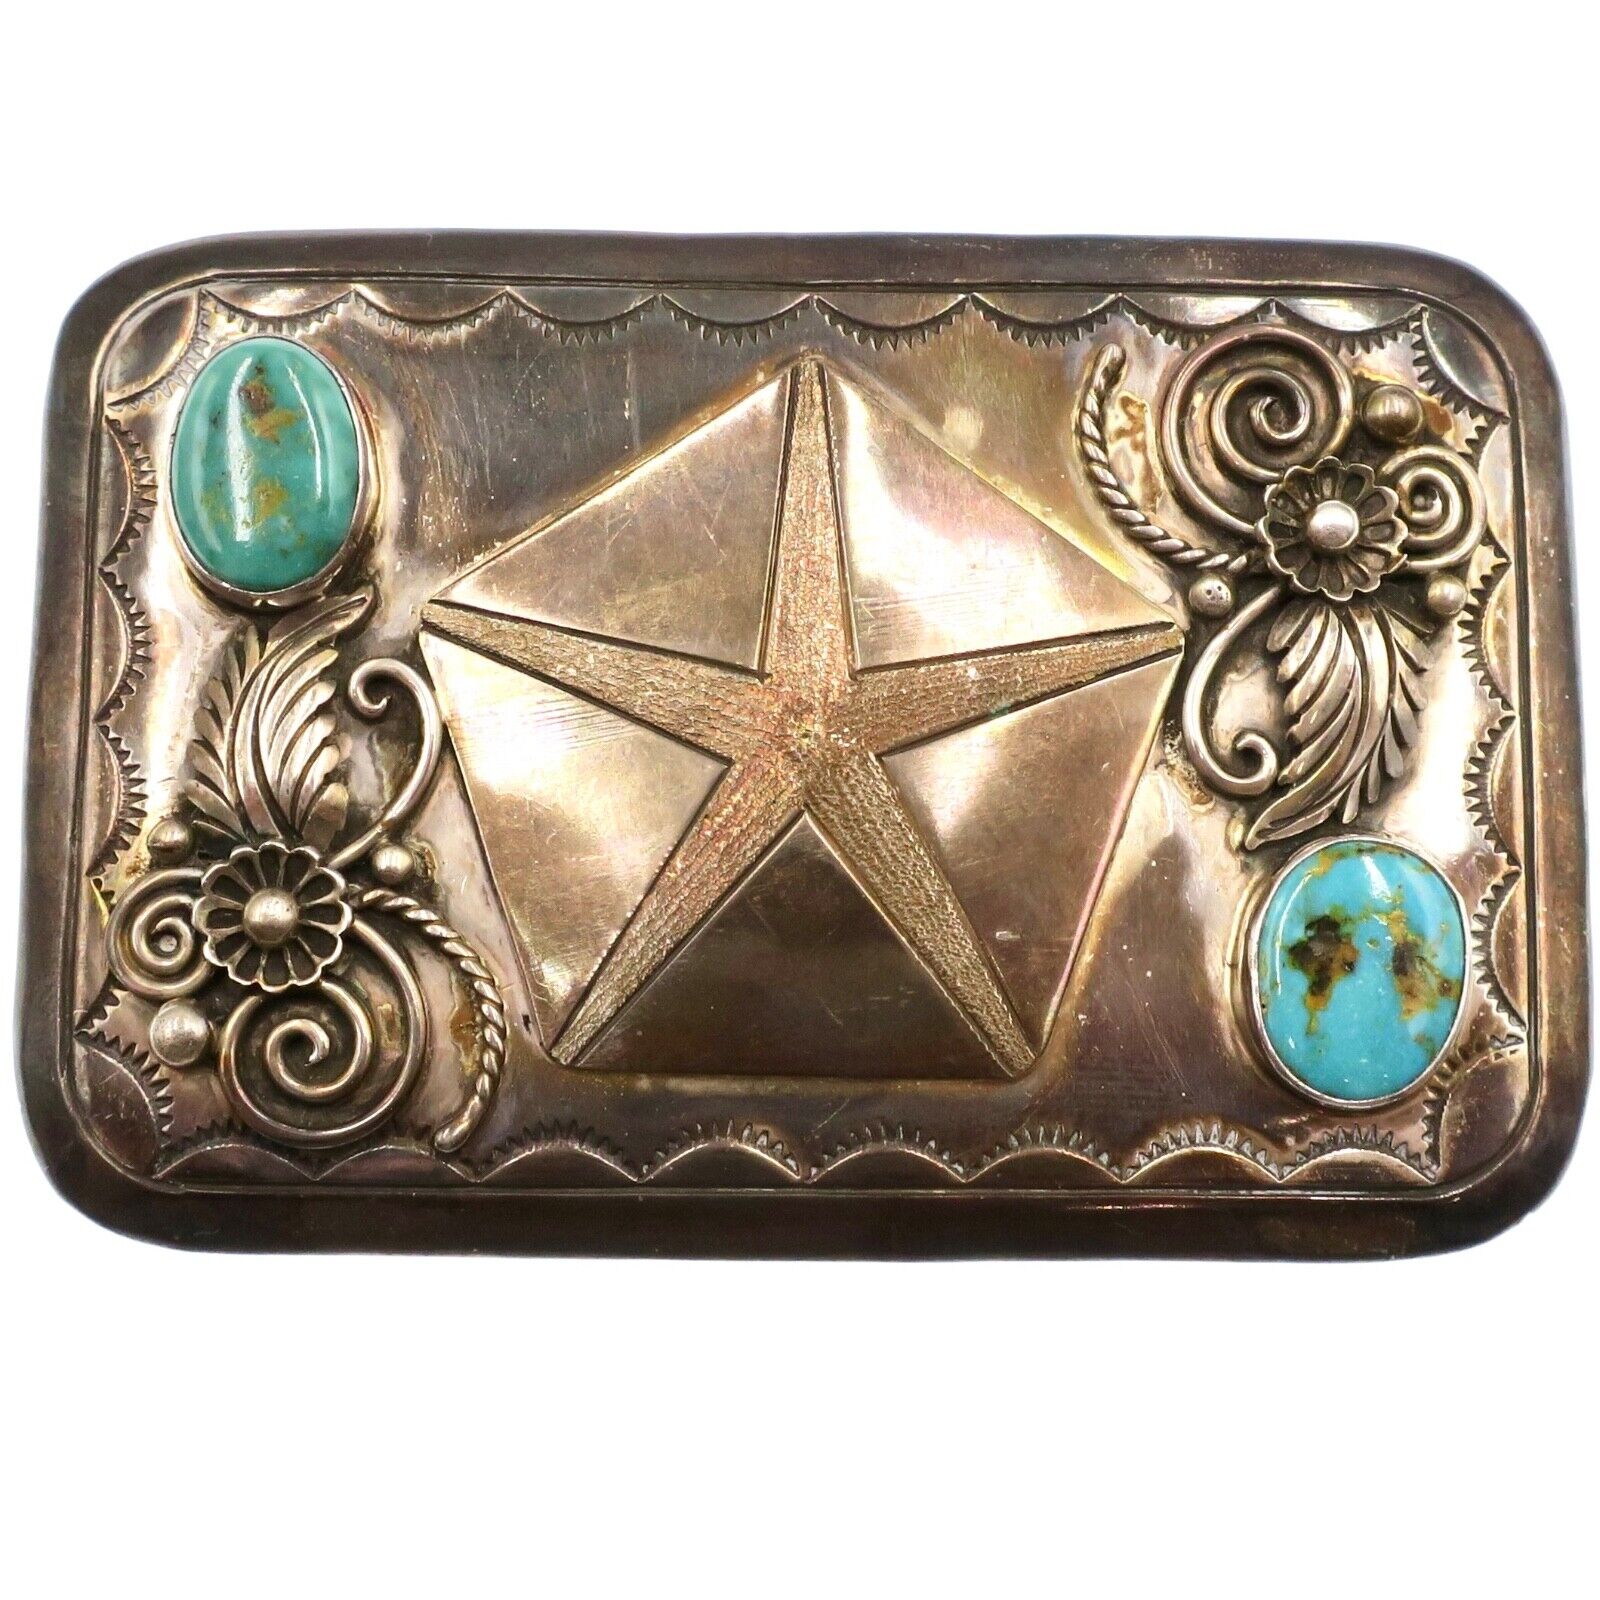 Chrysler Sterling Silver and Turquoise Belt Buckel